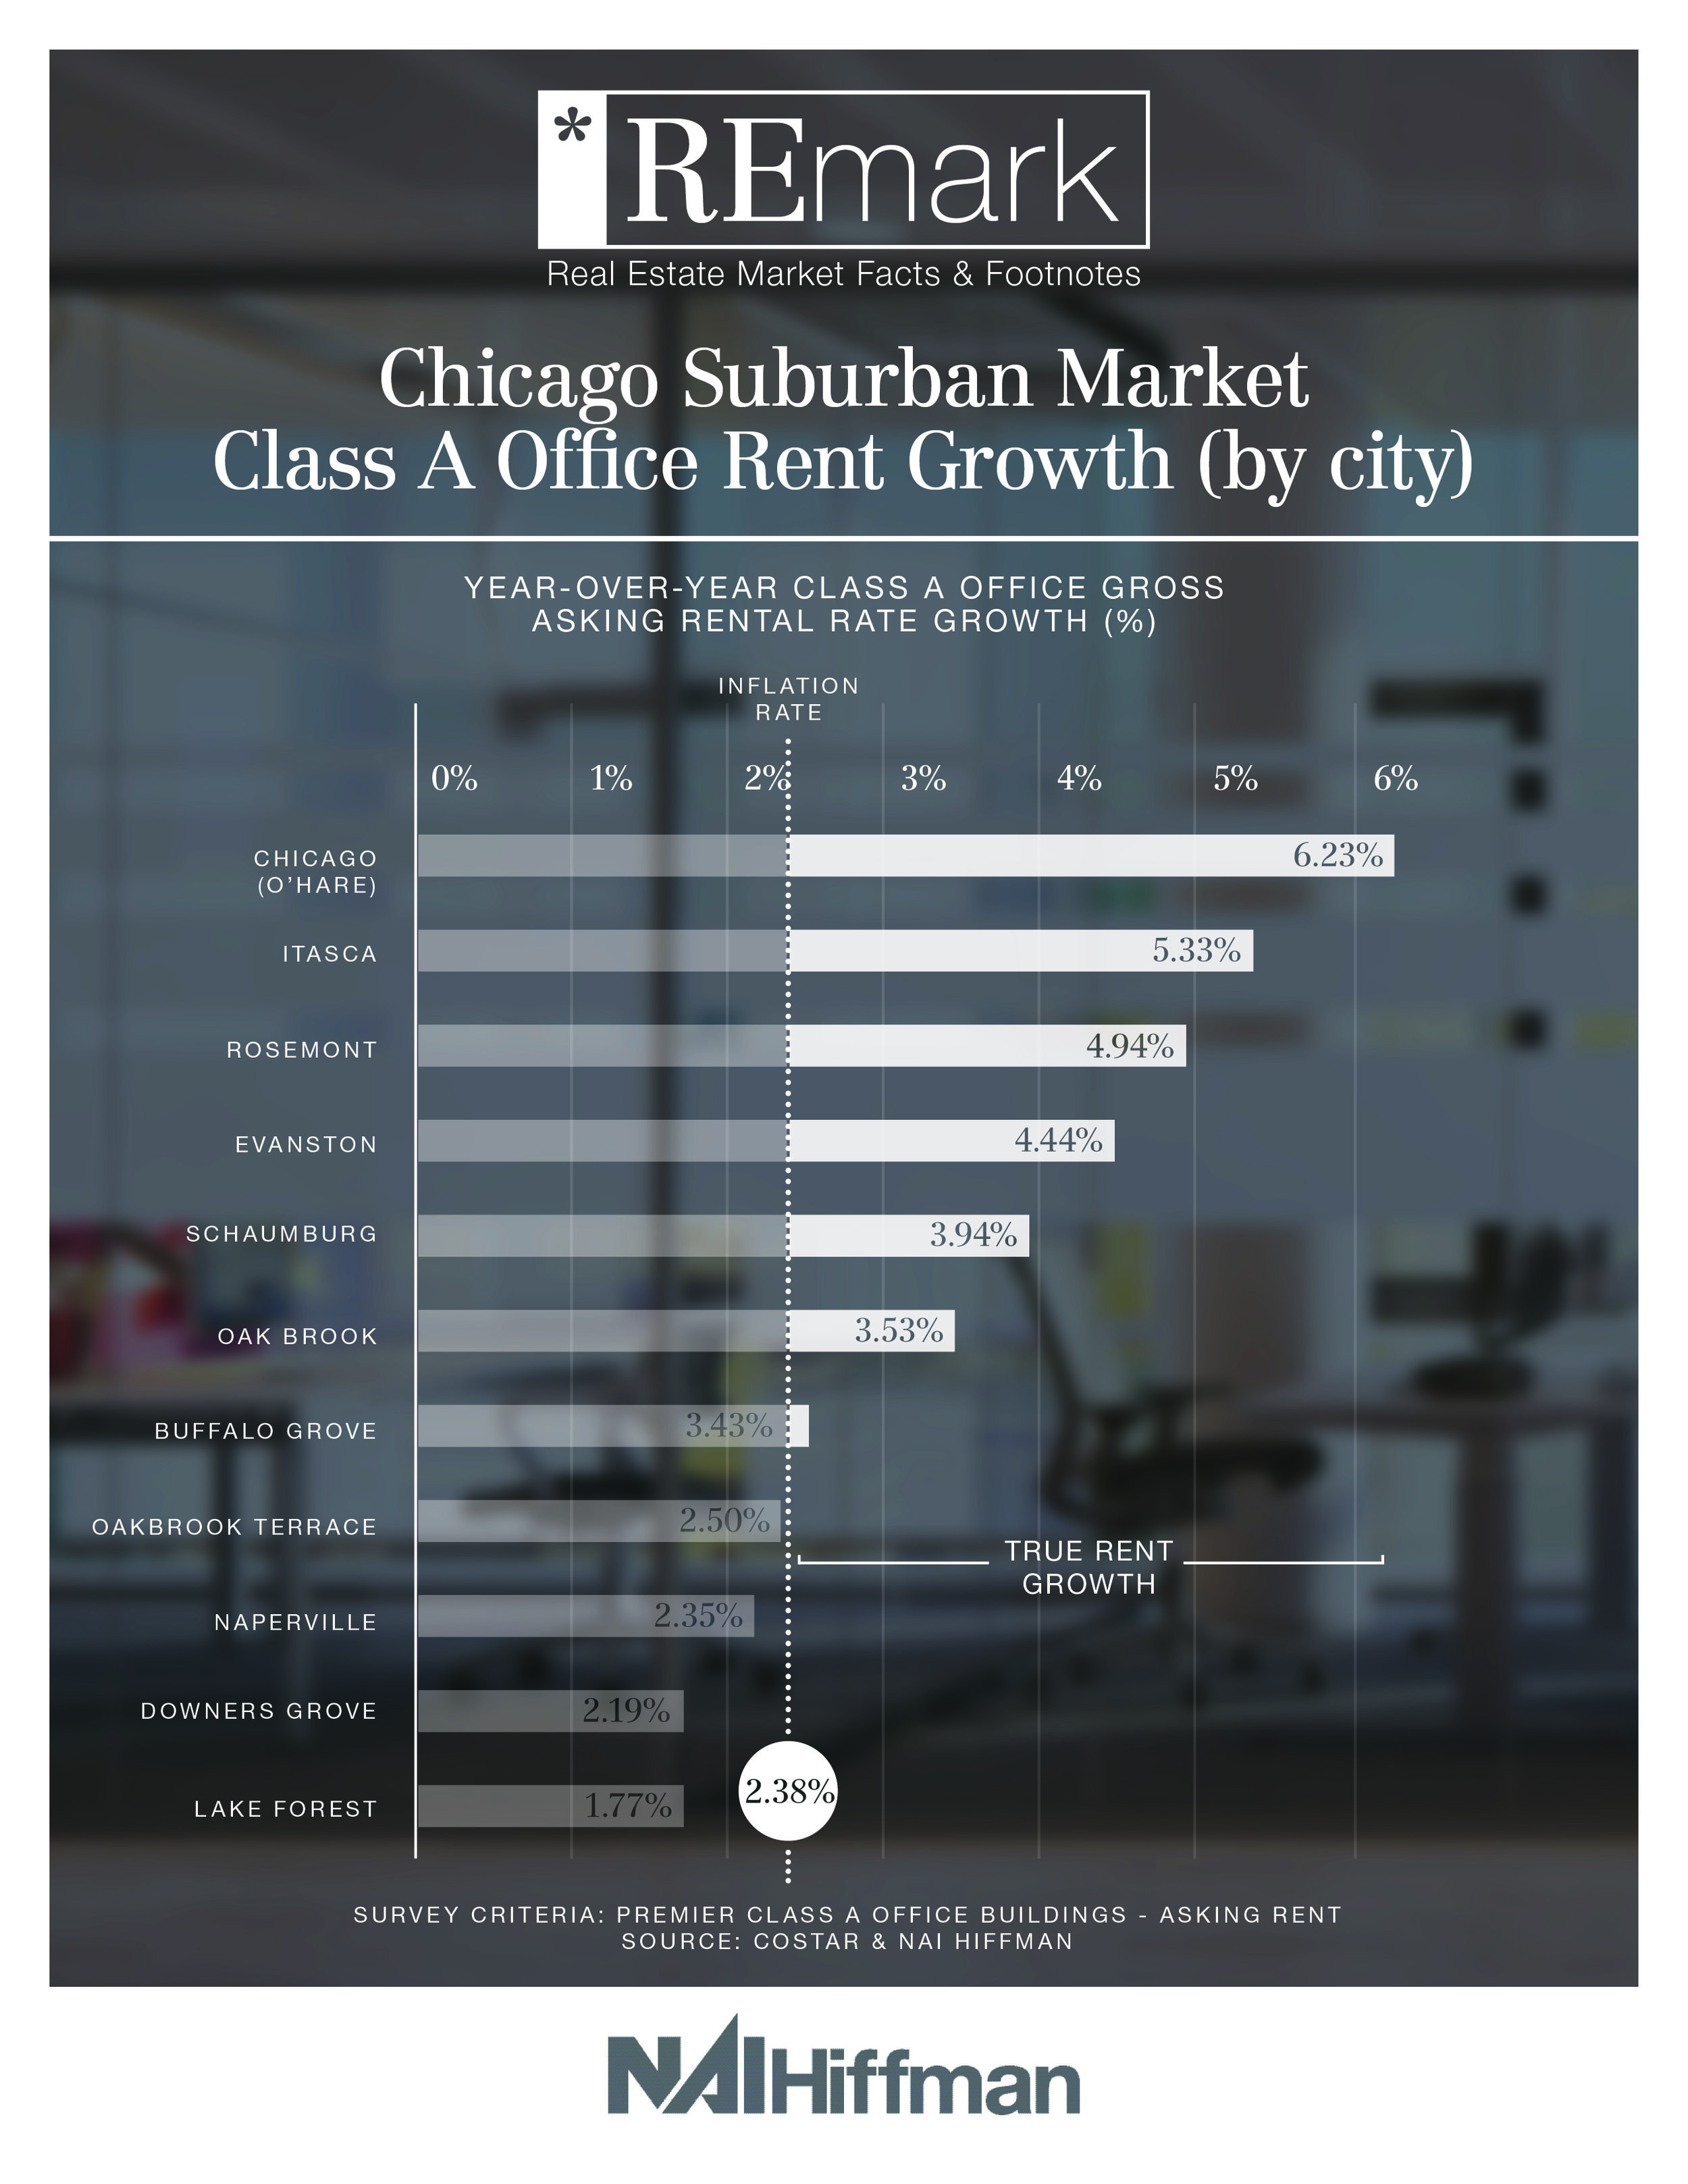 REmark: Chicago Suburban Market Class A Office Rent Growth (by city)